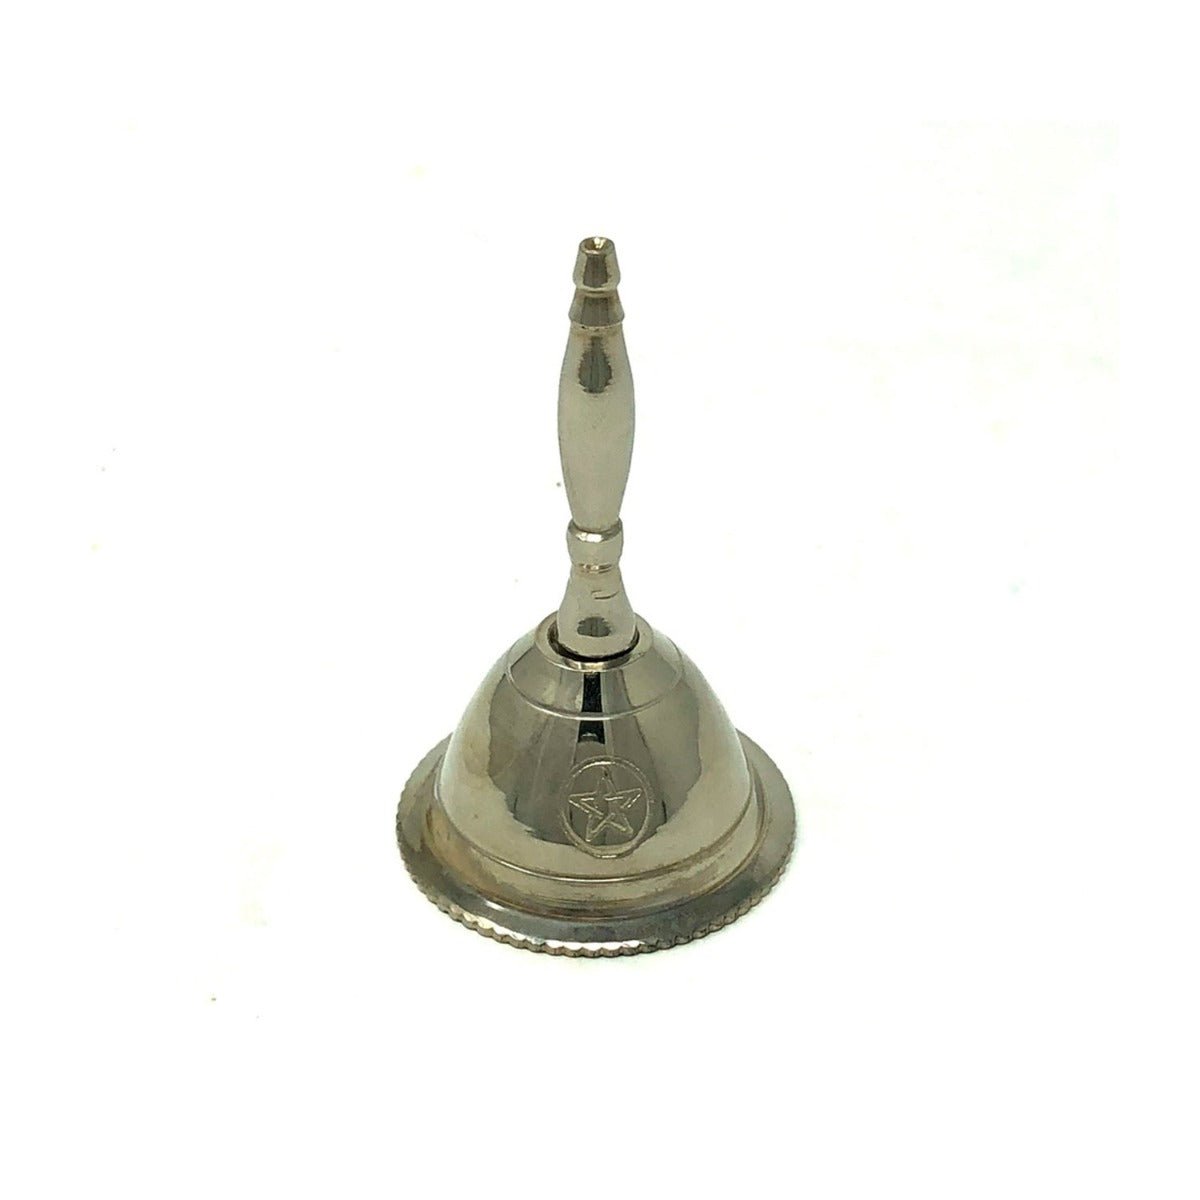 Set of 6 Silver Bells 1 inch